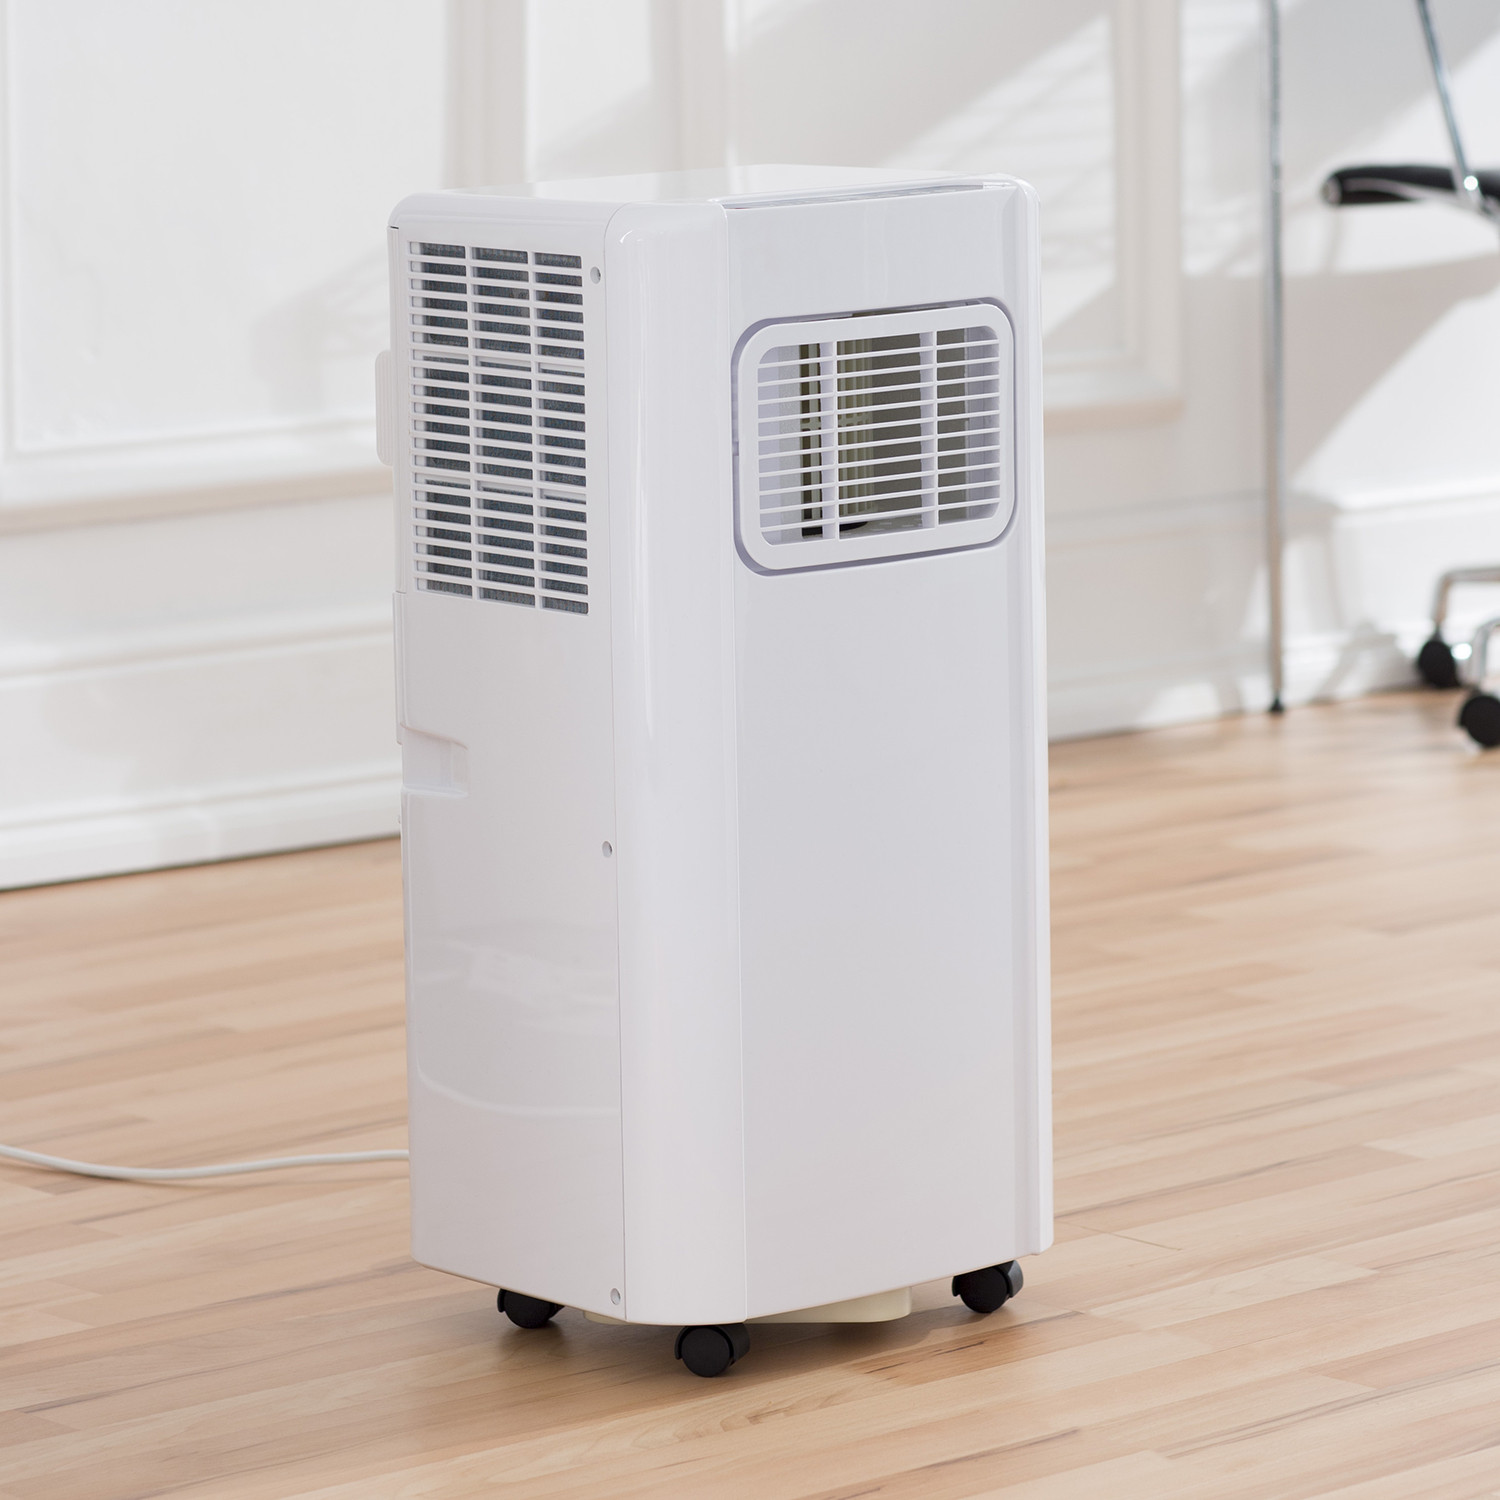 How Much Does It Cost To Run A Portable Air Conditioner